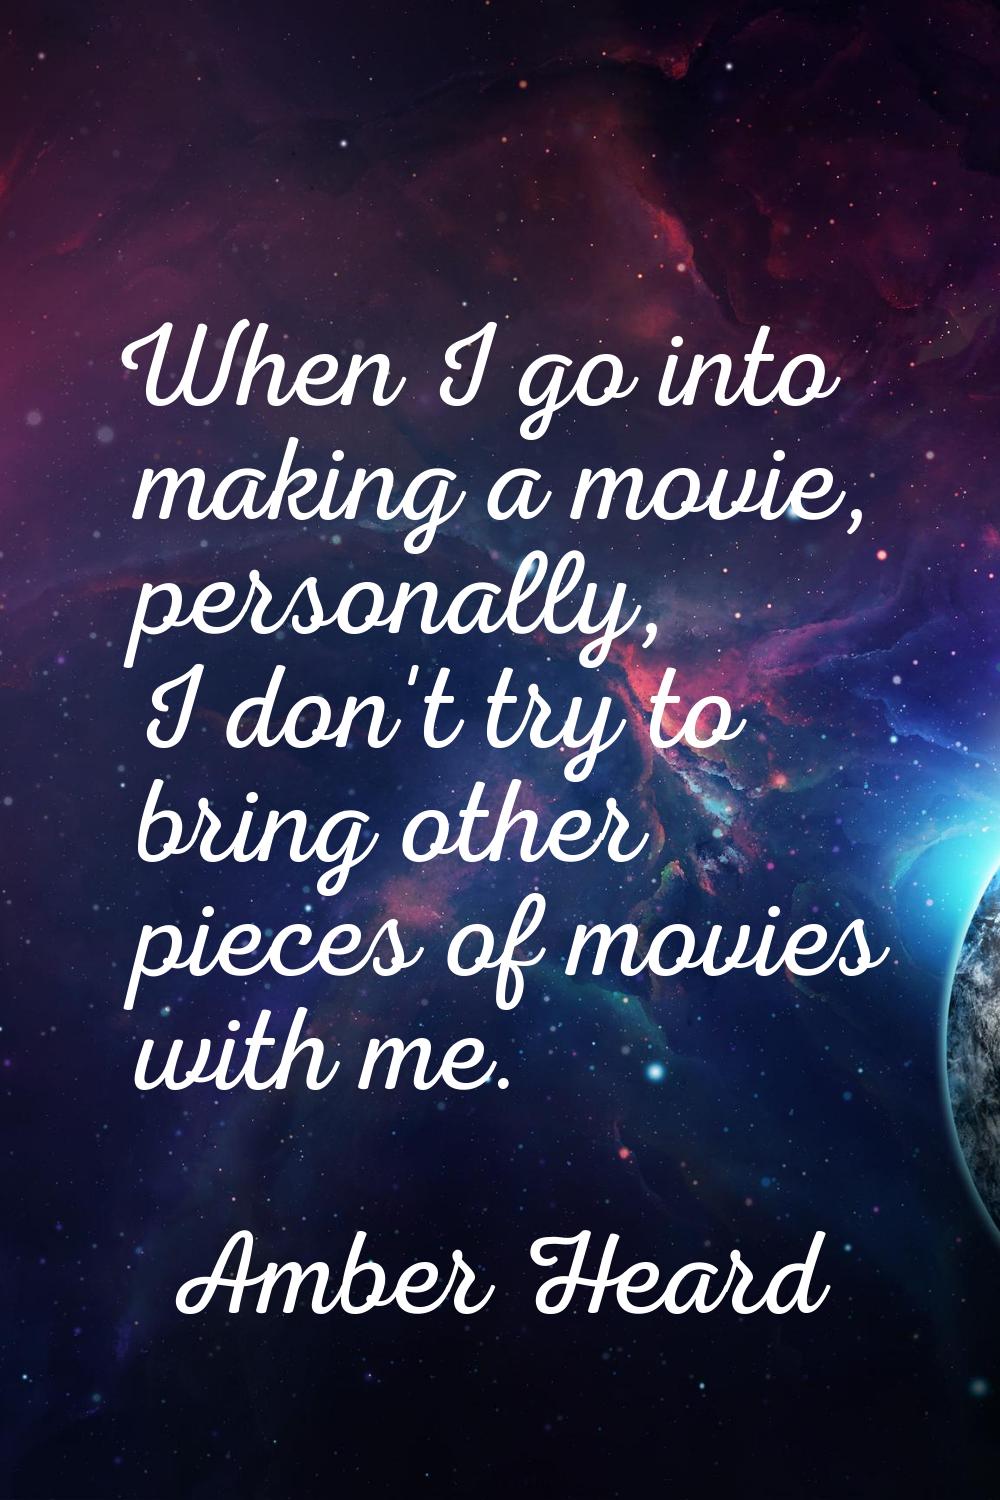 When I go into making a movie, personally, I don't try to bring other pieces of movies with me.